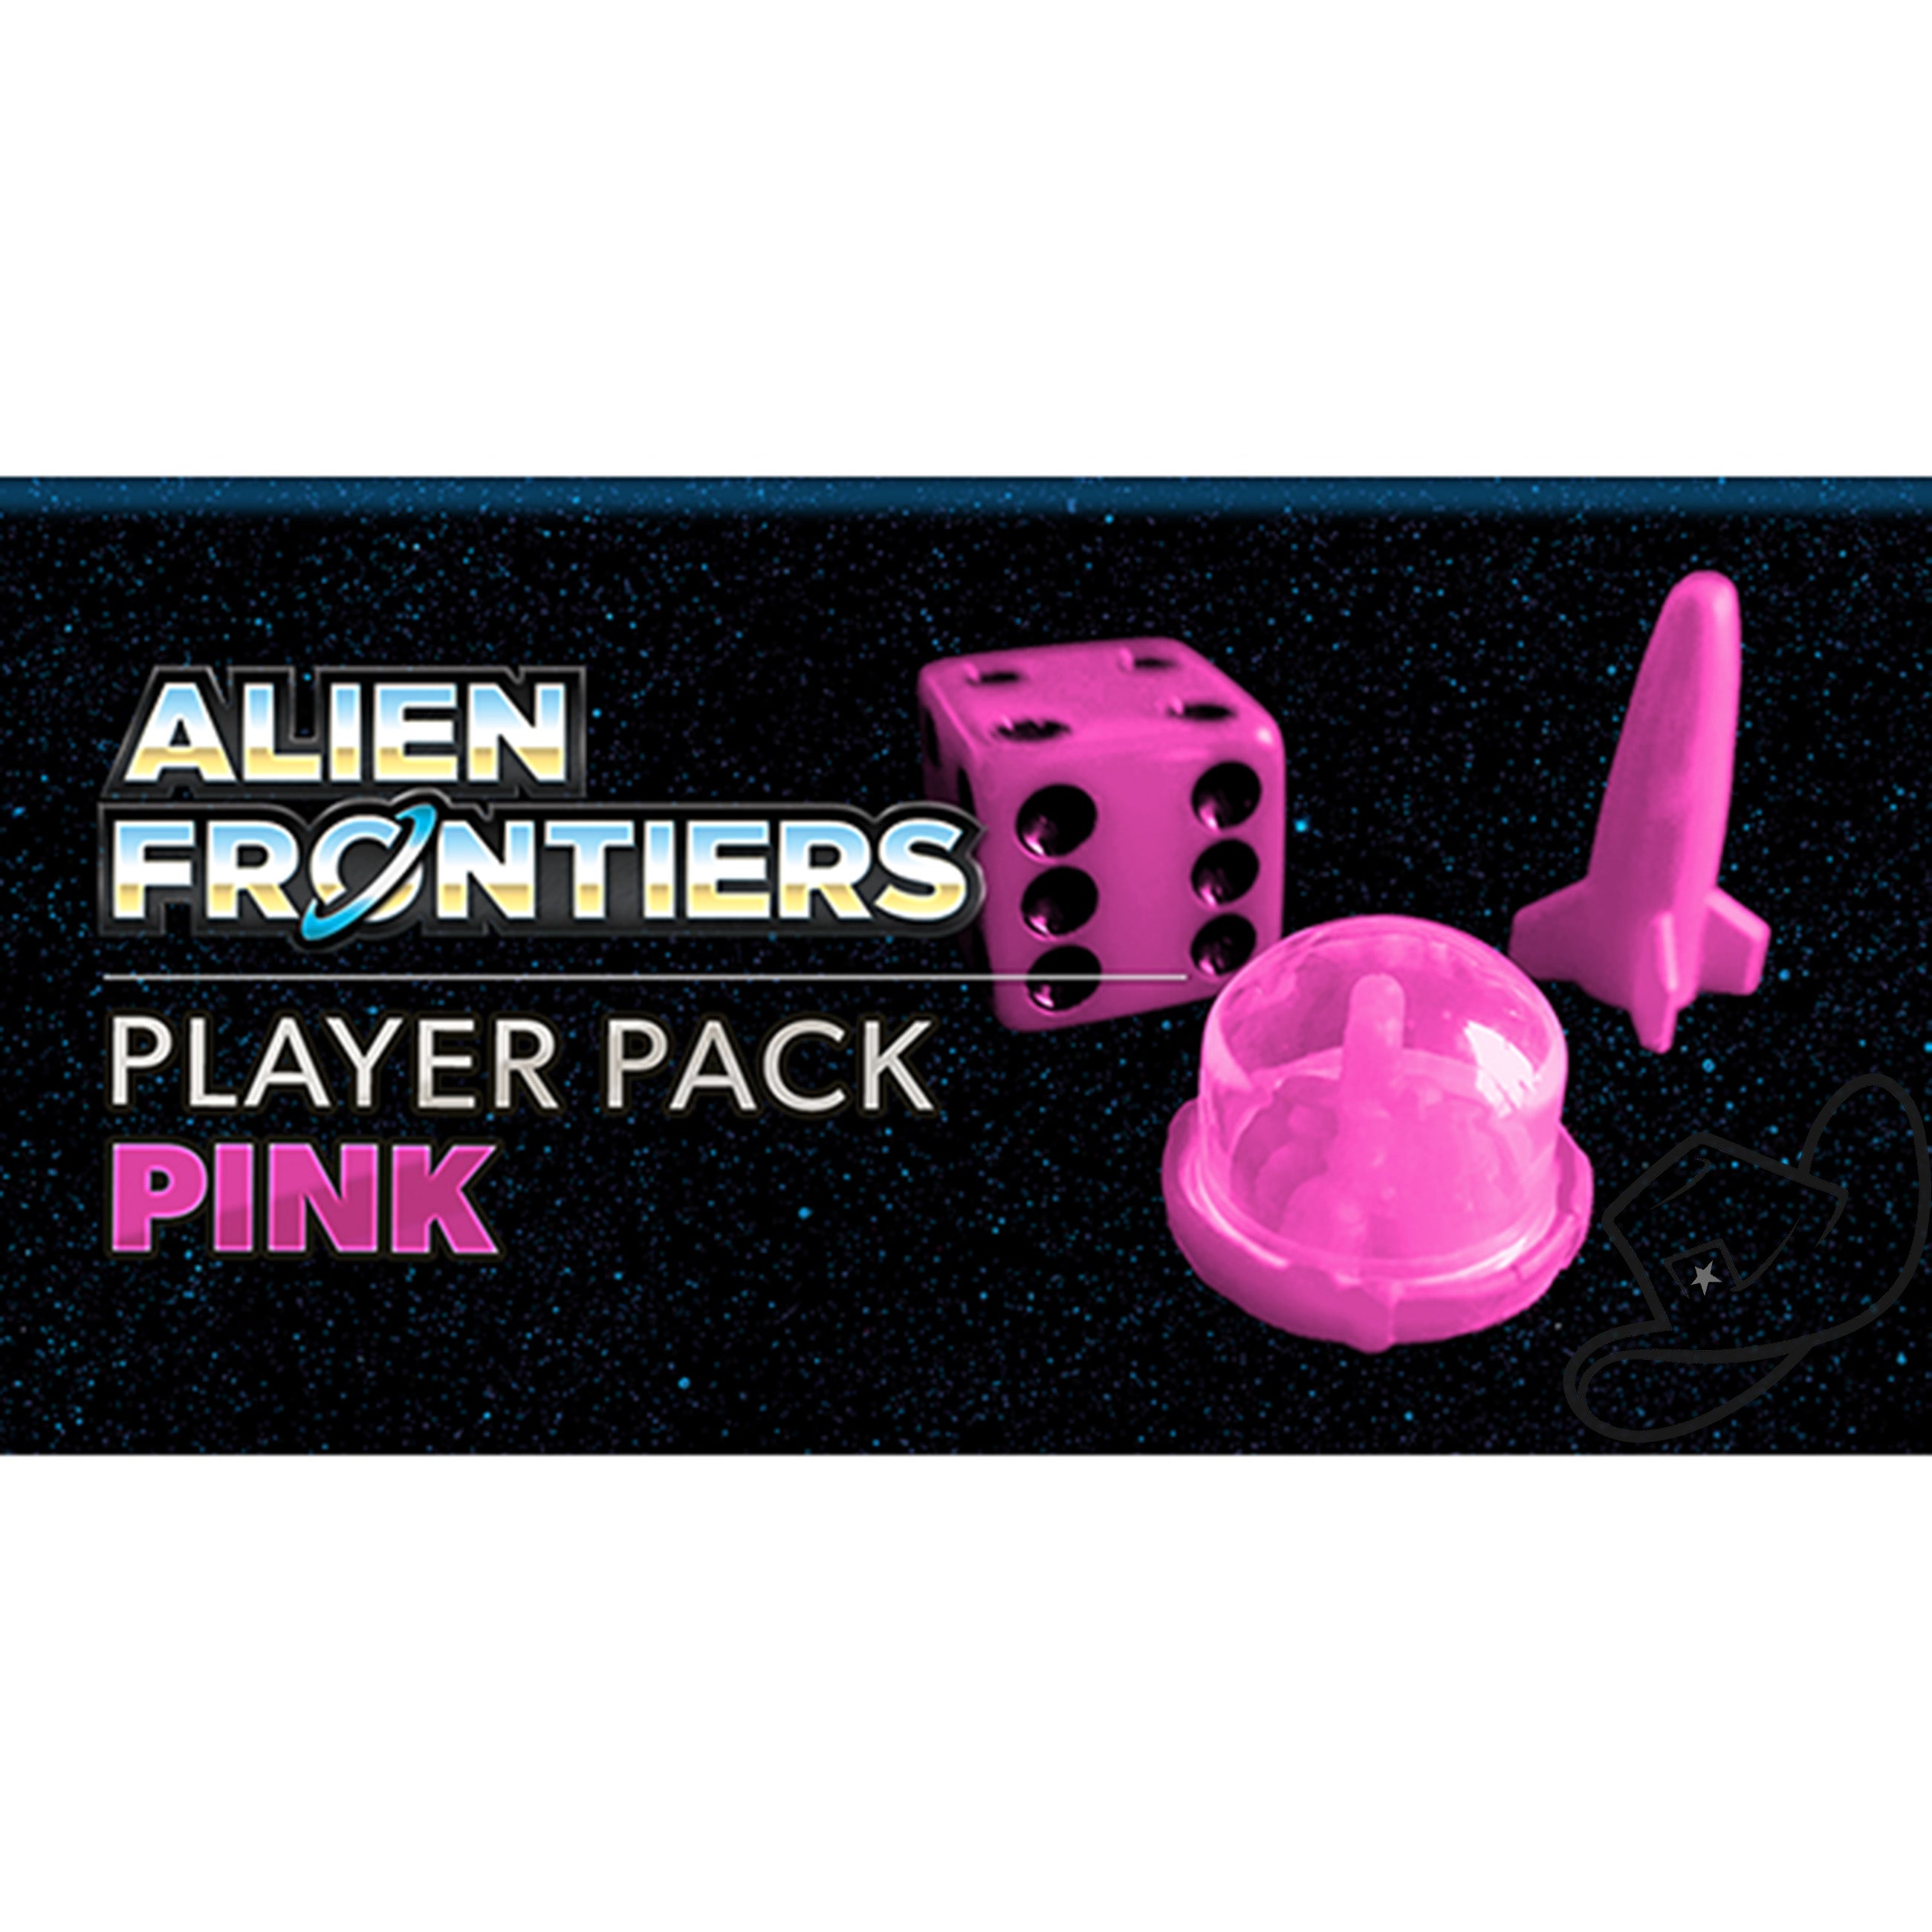 Alien frontiers players pack pink contains all the pieces needed to add a new player